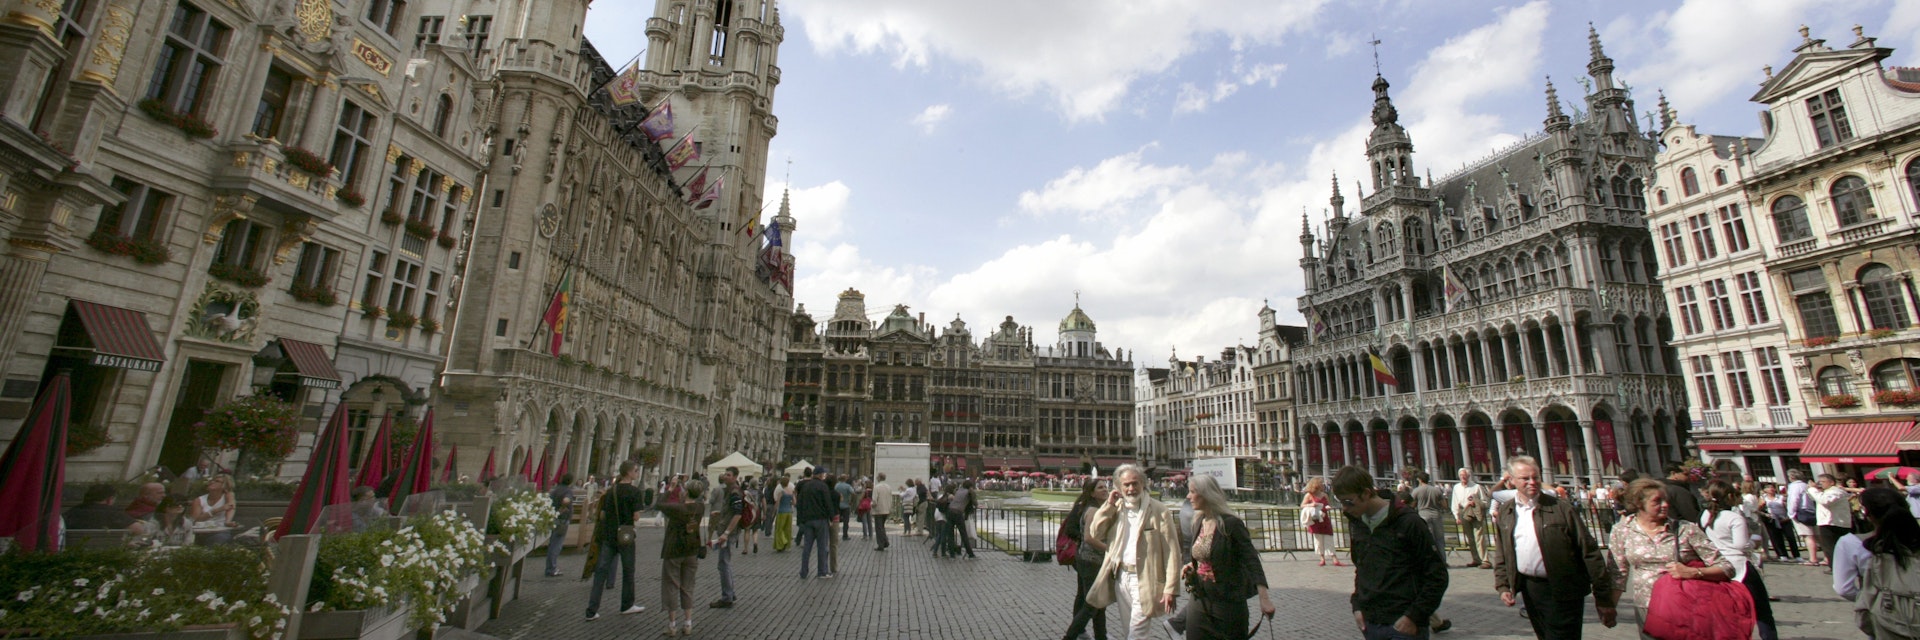 BELGIUM - AUGUST 11: BELGIUM, BRUSSELS, The Grand Place in Brussels. (Photo by Ulrich Baumgarten via Getty Images)